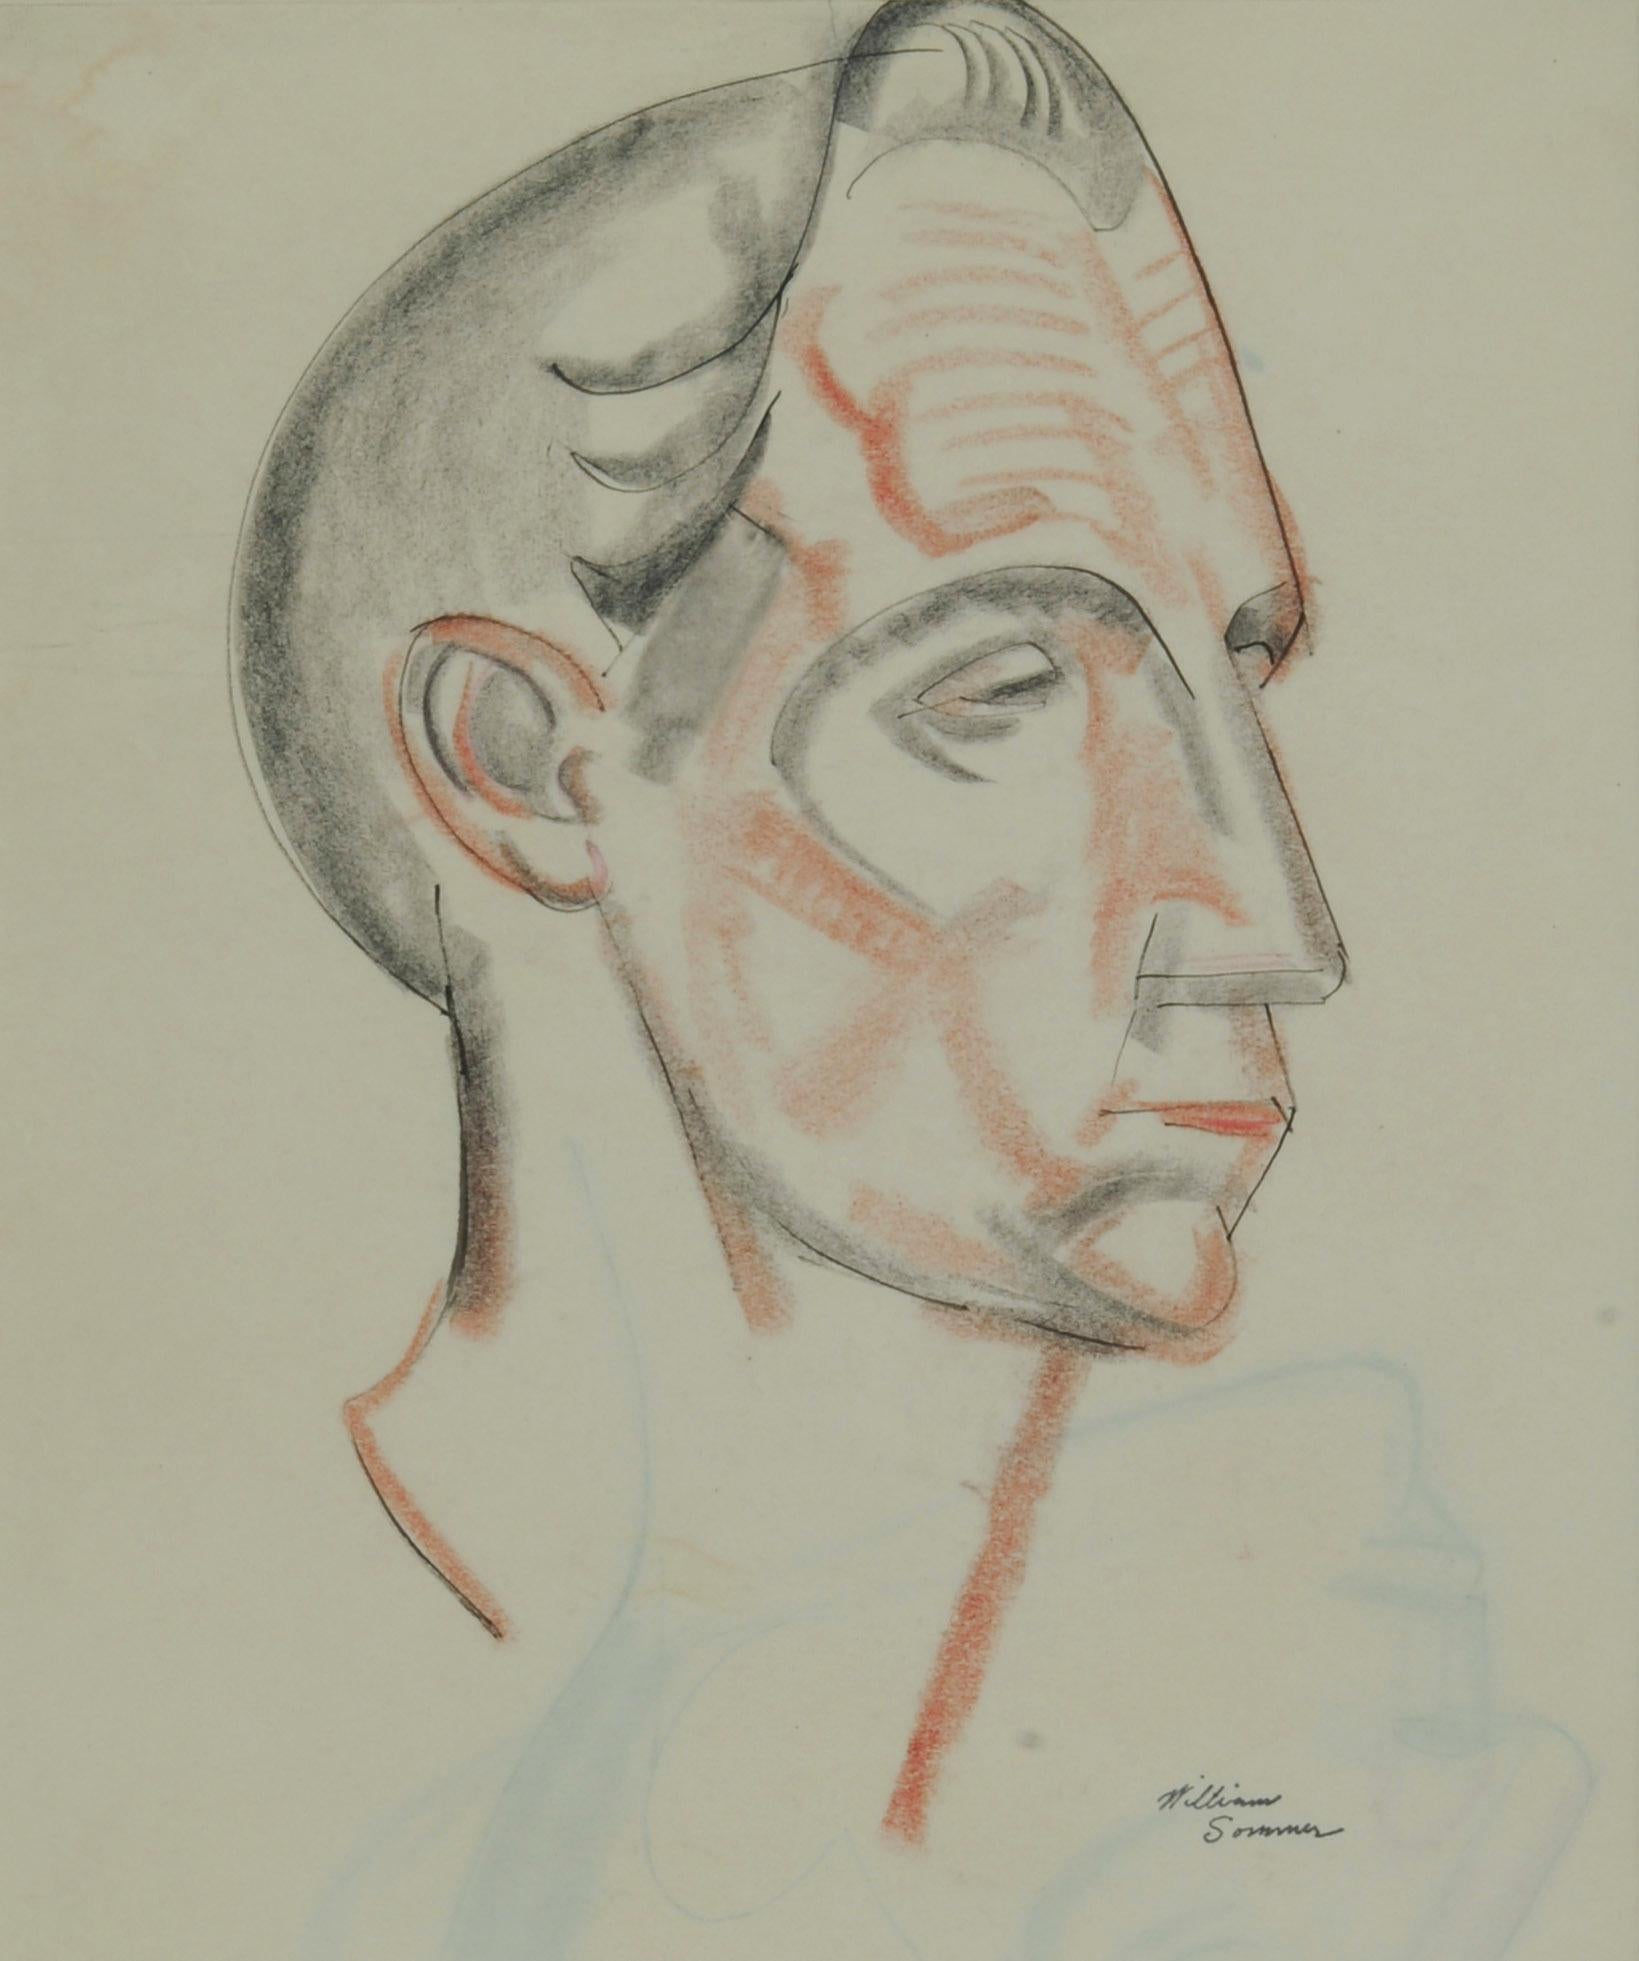 William Sommer Figurative Art - Head of a Man (recto) Sketch of a Man's Head (verso)